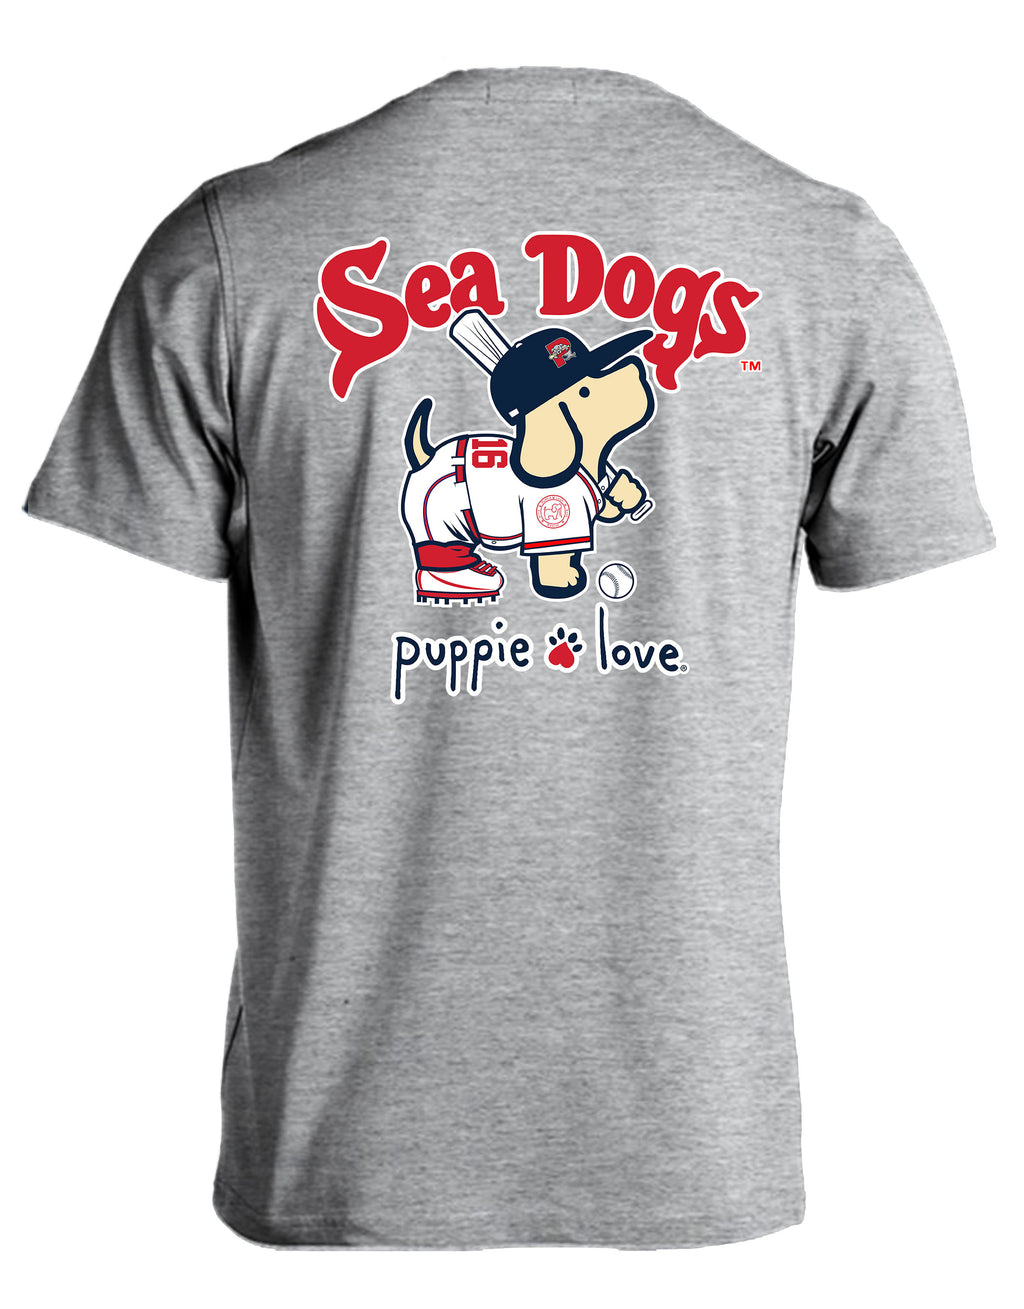 PORTLAND SEA DOGS BASEBALL PUP (PRINTED TO ORDER) - Puppie Love